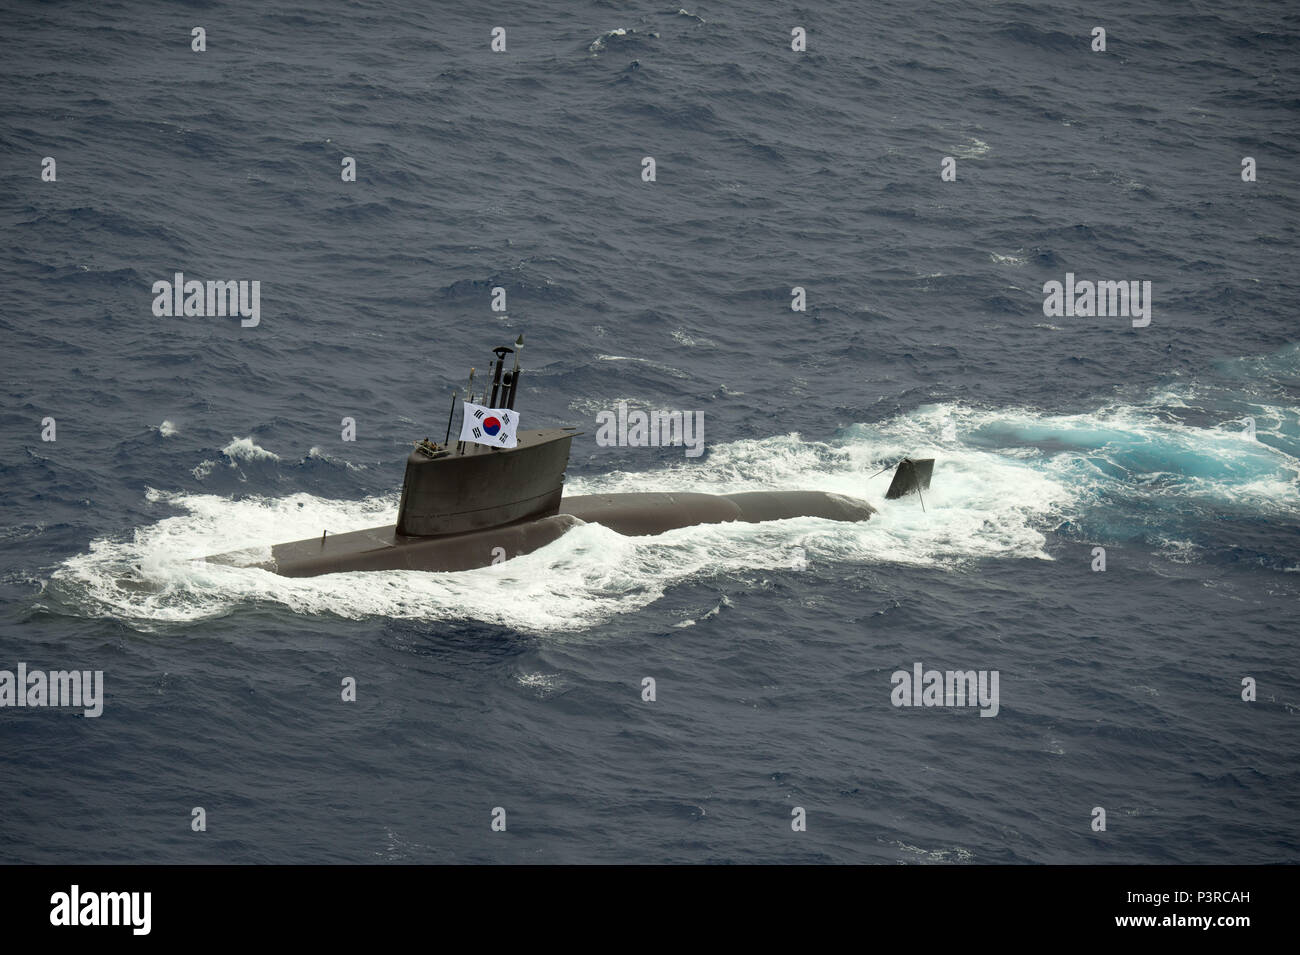 160728-N-SI773-3273 PACIFIC OCEAN (July 28, 2016) Republic of Korea Chang Bogo-class submarine ROKS Lee Eokgi (SS 071) transits in close formation as one of 40 ships and submarines representing 13 international partner nations during Rim of the Pacific 2016. Twenty-six nations, more than 40 ships and submarines, more than 200 aircraft, and 25,000 personnel are participating in RIMPAC from June 30 to Aug. 4, in and around the Hawaiian Islands and Southern California. The world's largest international maritime exercise, RIMPAC provides a unique training opportunity that helps participants foster Stock Photo